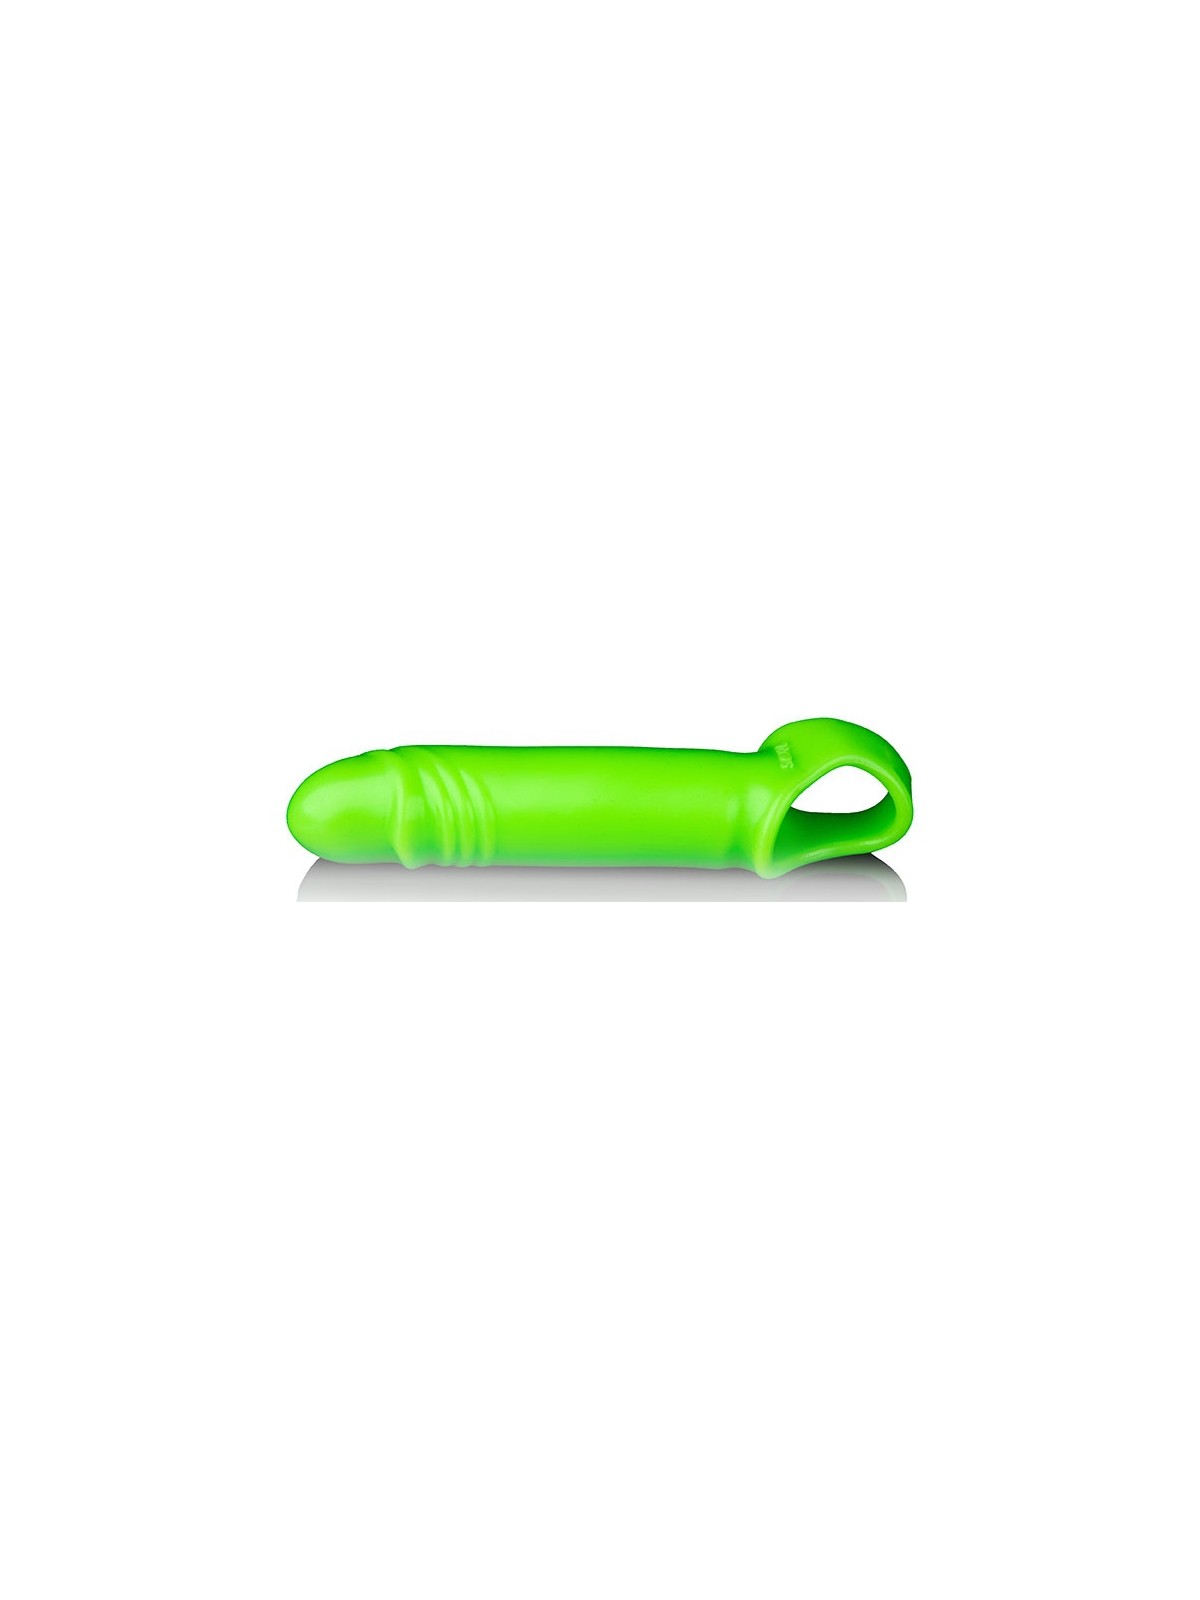 Penis extension Thin Glow 11 x 3cm phosphorescent penis sheath Phosphorescence activates after prolonged exposure to light. Inst